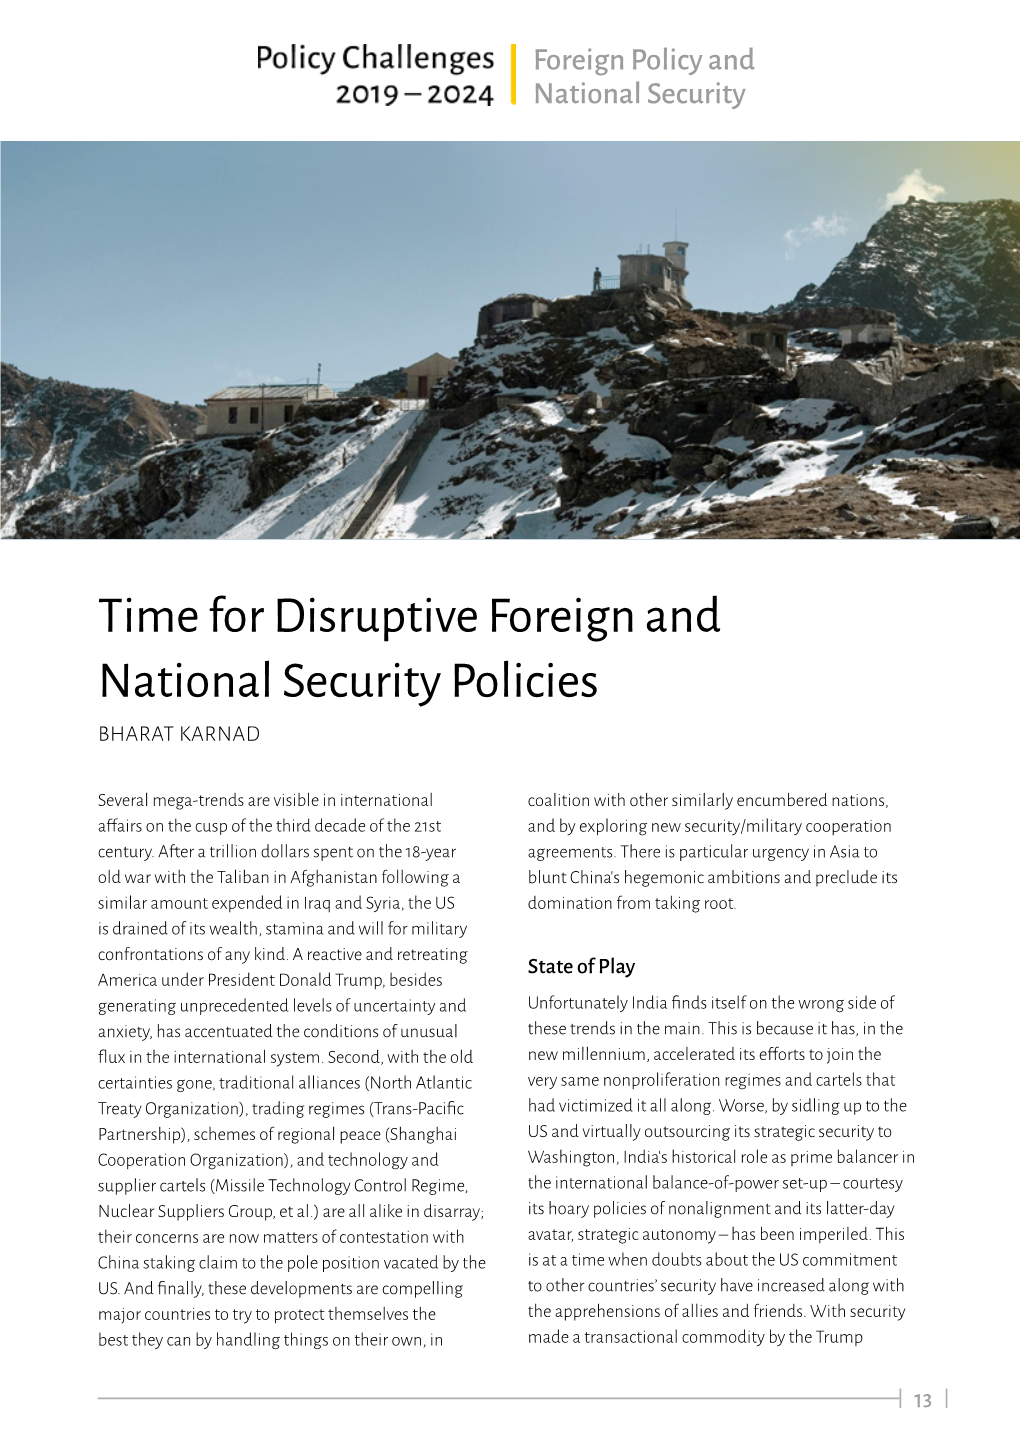 Time for Disruptive Foreign and National Security Policies BHARAT KARNAD